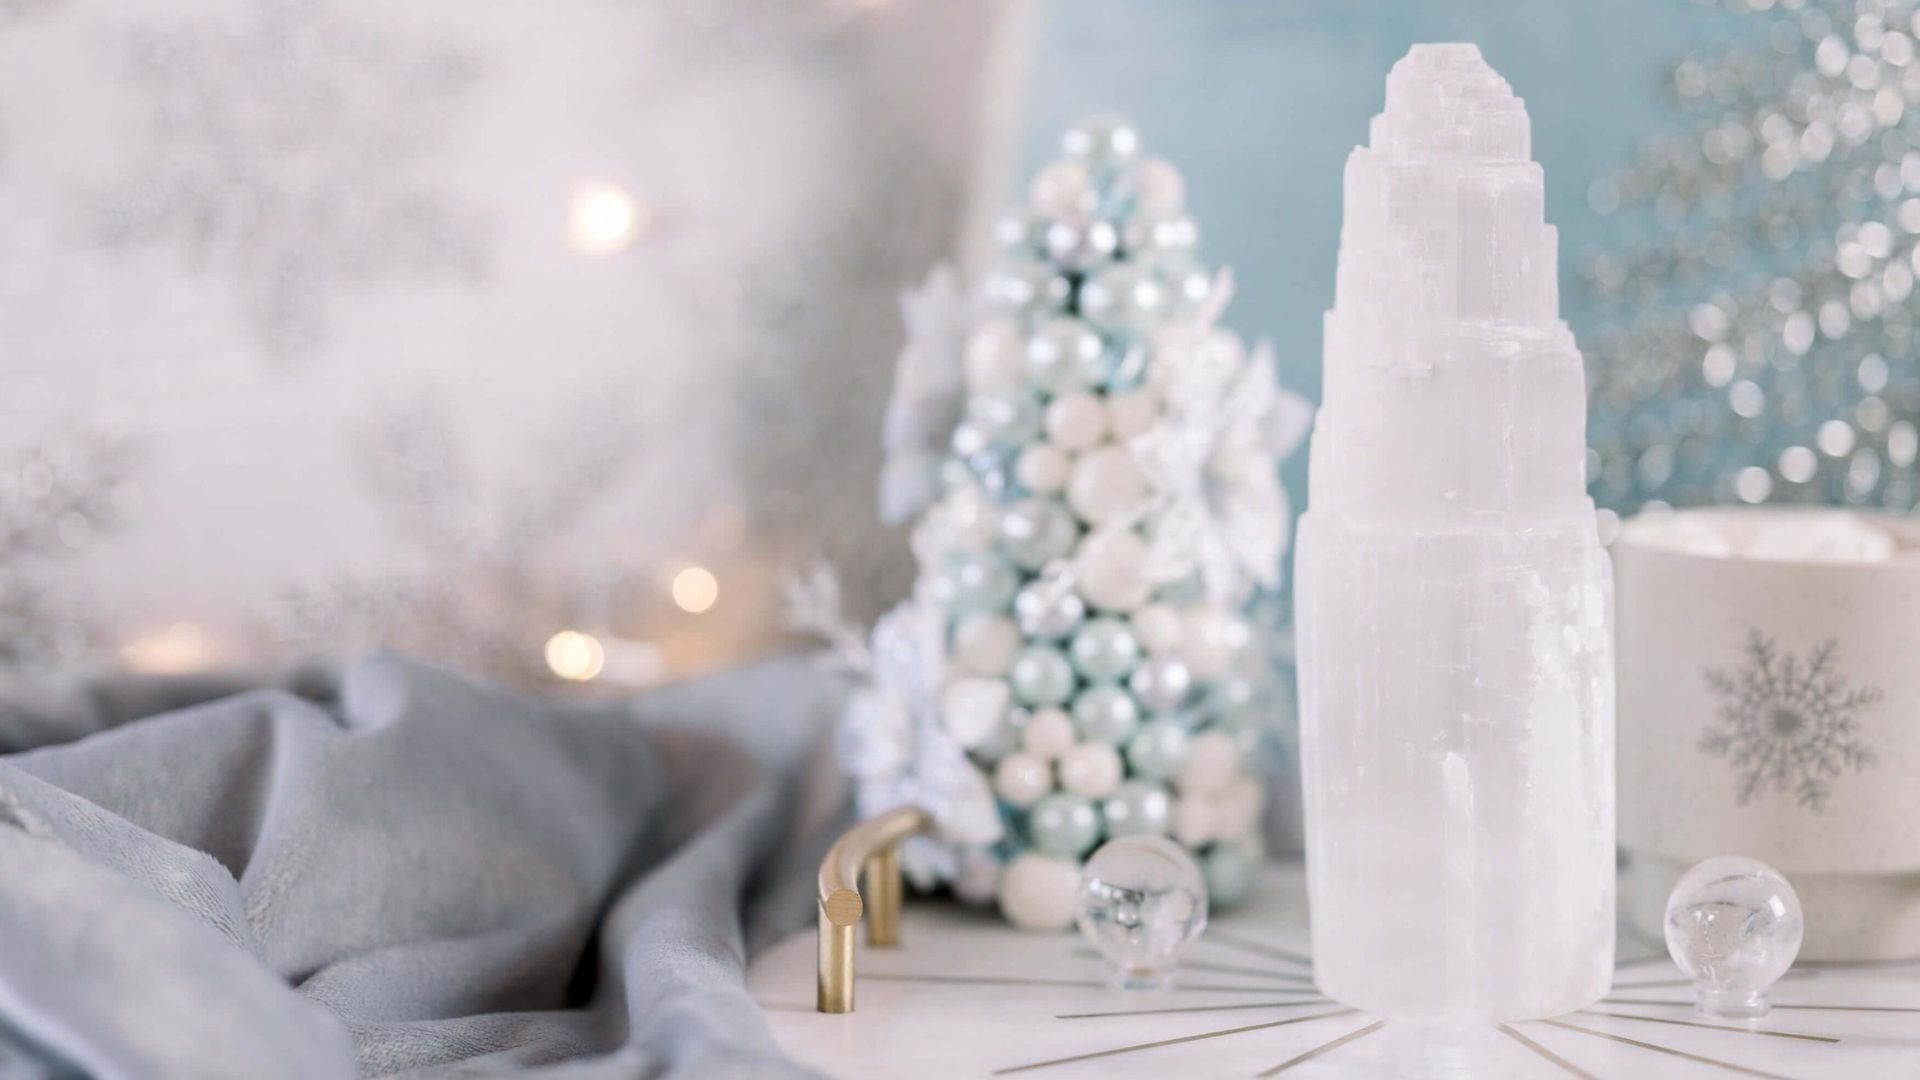 A Christmas holiday scene with pastel ornaments, a selenite tower, and a mini Christmas tree